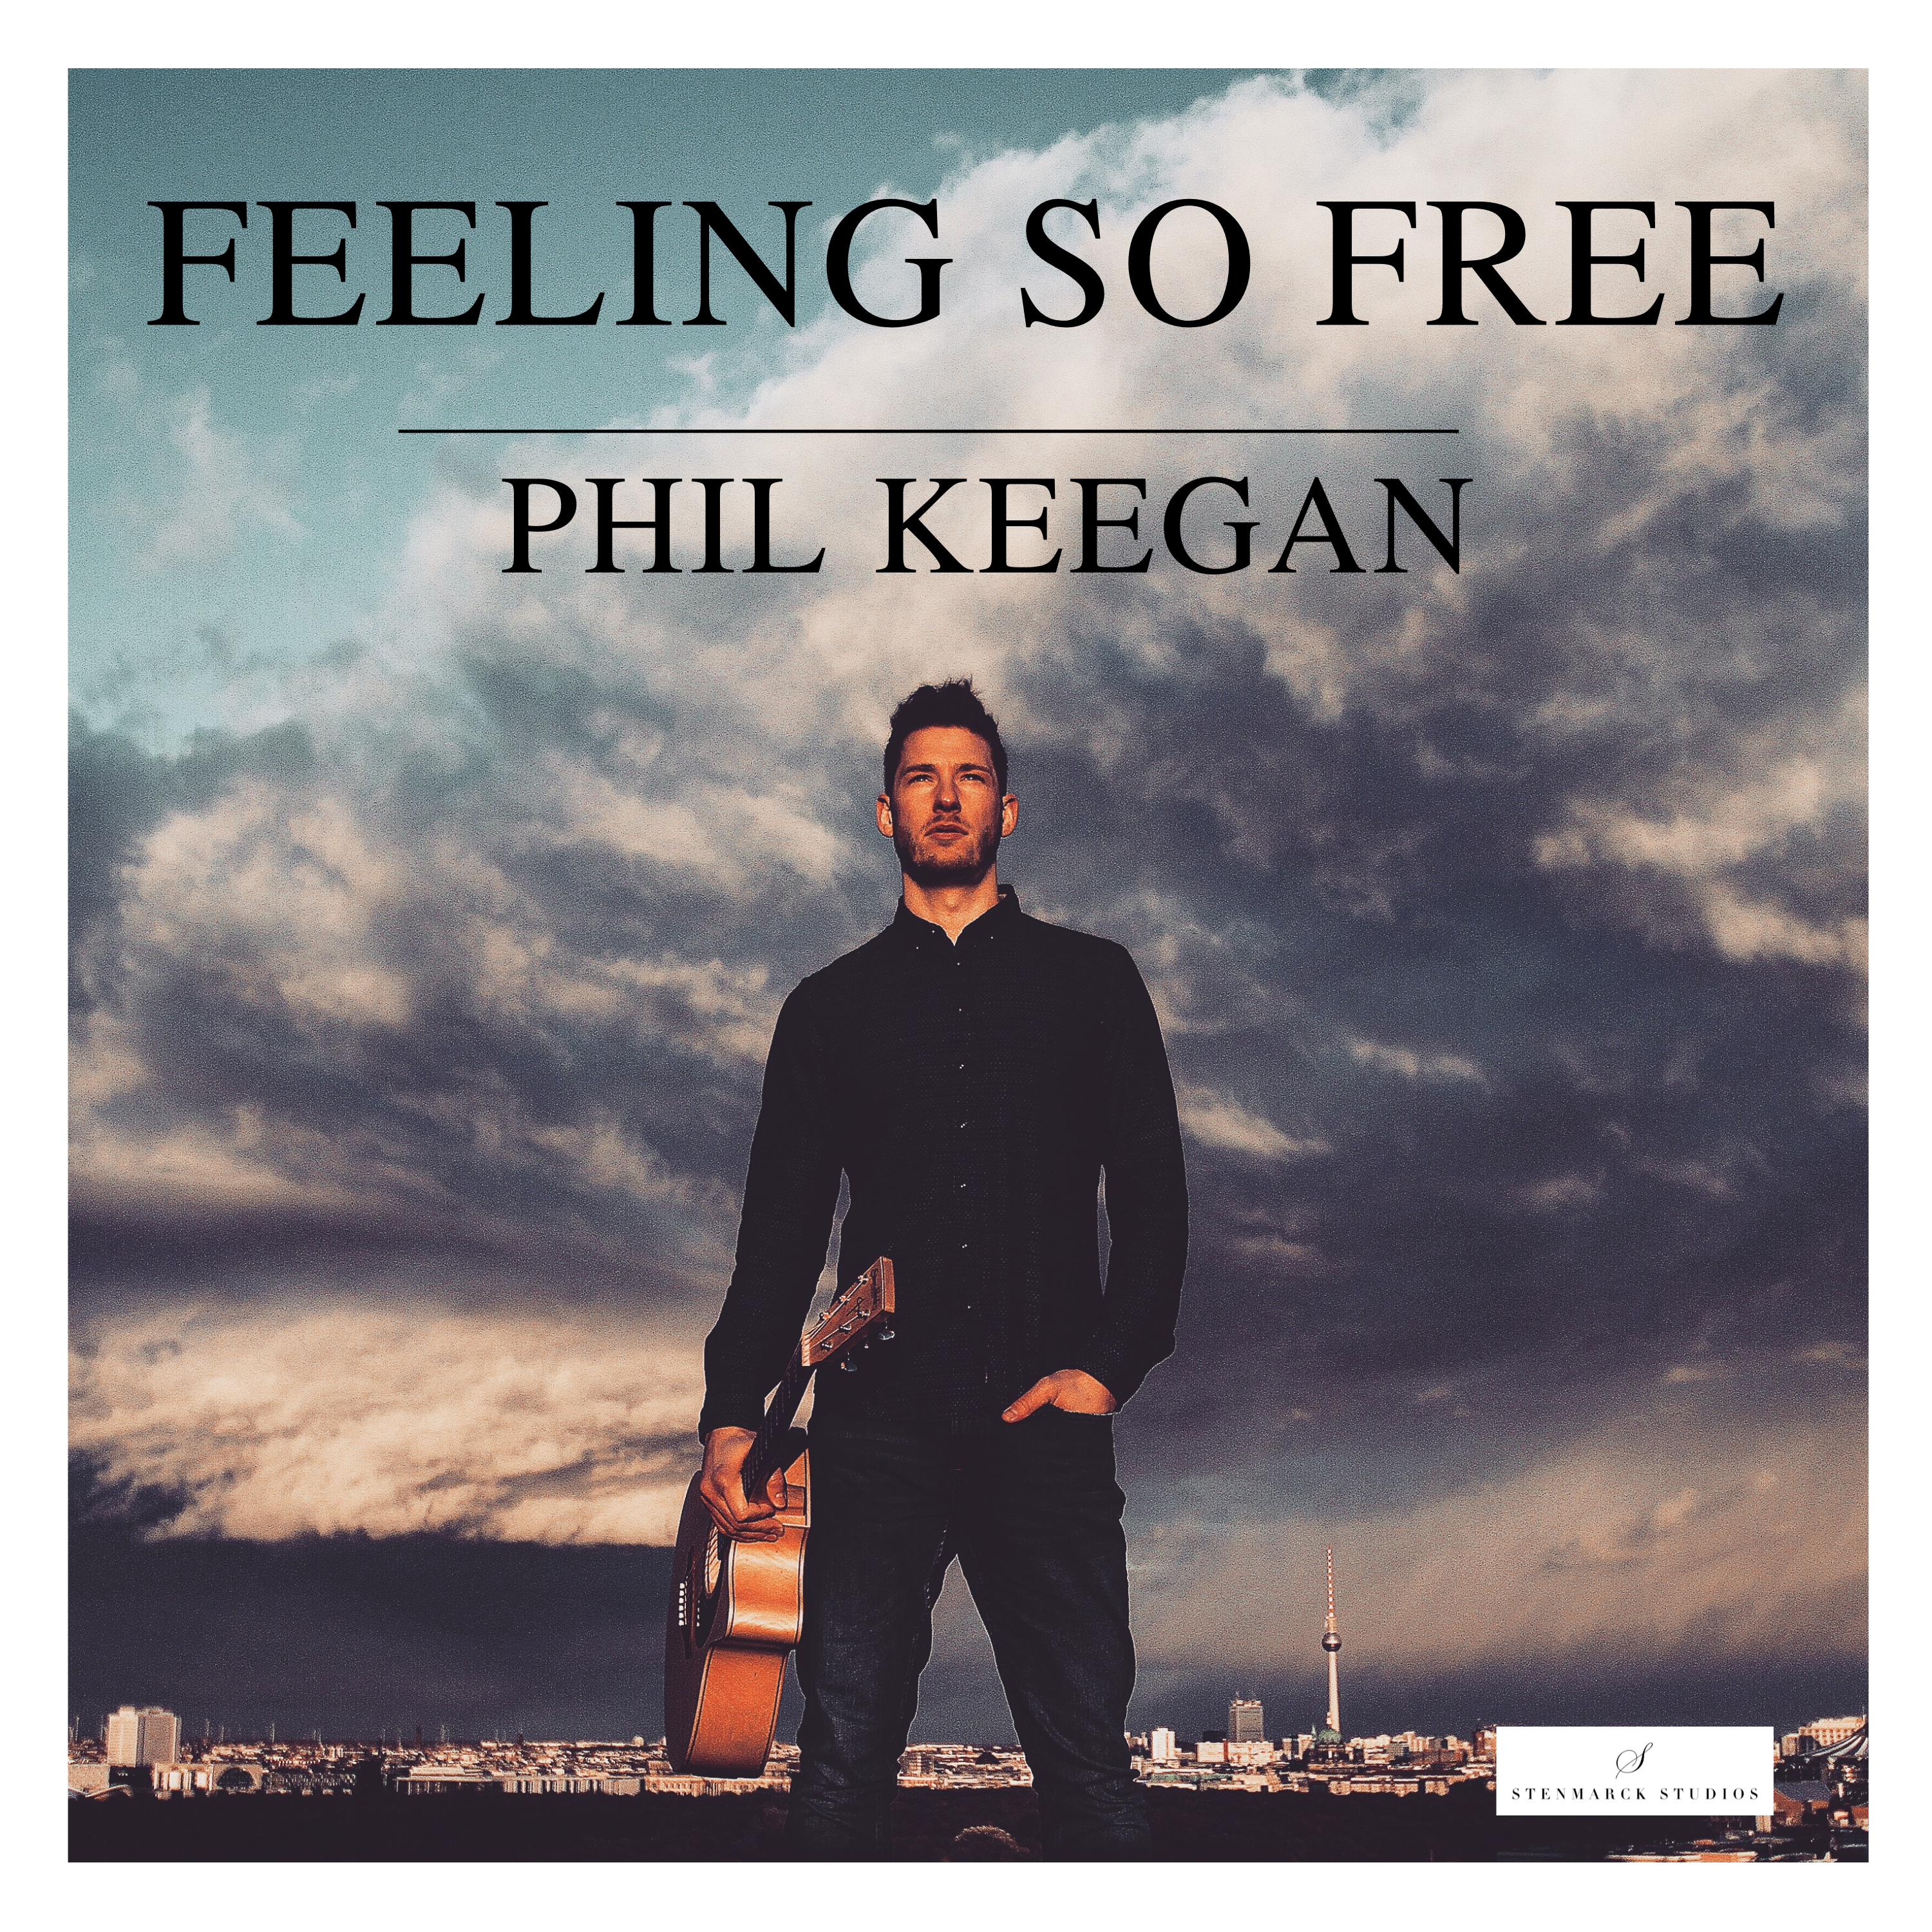 ‘Phil Keegan’ is an Irish-American Pop music artist who releases his lovely new single ‘Feeling So Free’.